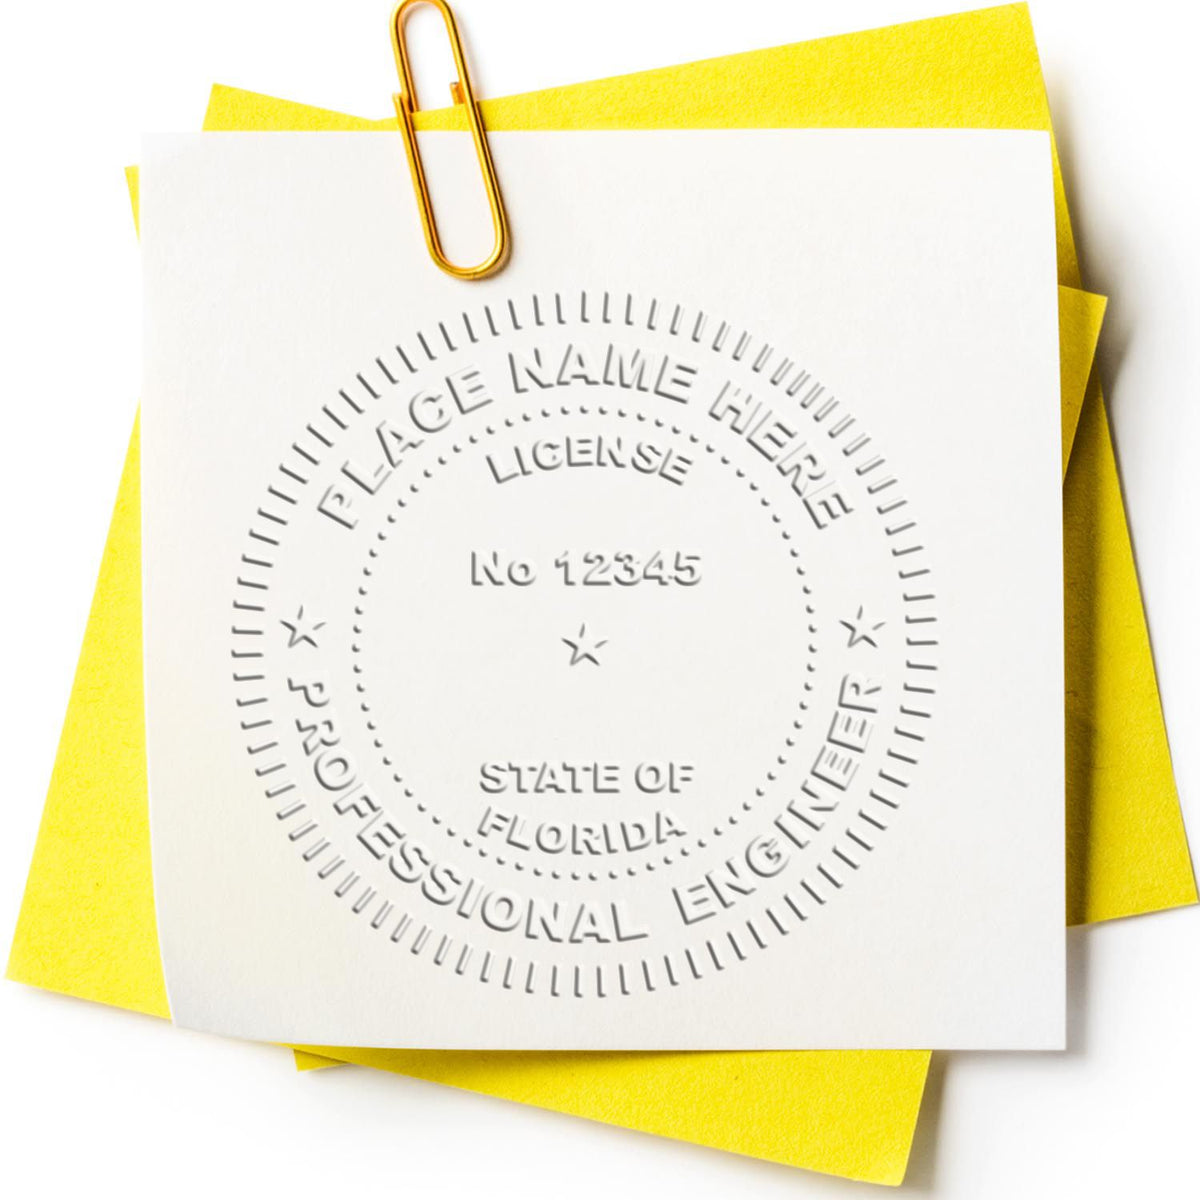 The Heavy Duty Cast Iron Florida Engineer Seal Embosser stamp impression comes to life with a crisp, detailed photo on paper - showcasing true professional quality.